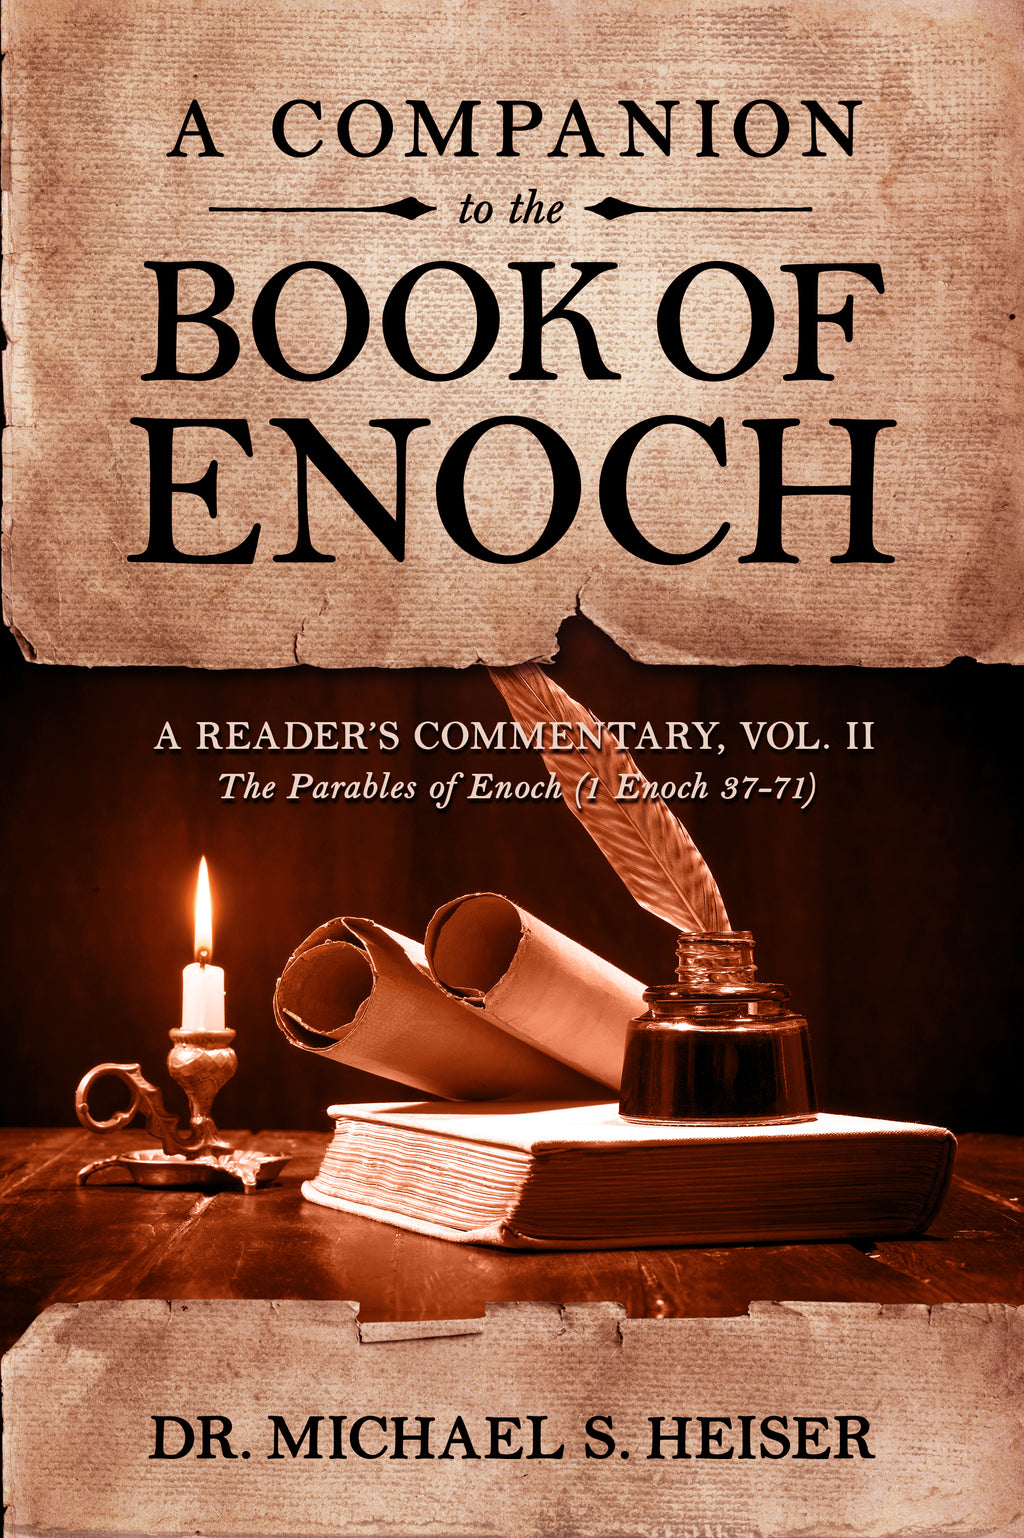 A Companion to the Book of Enoch A Reader’s Commentary, Vol II: The Parables of Enoch (1 Enoch 37-71)